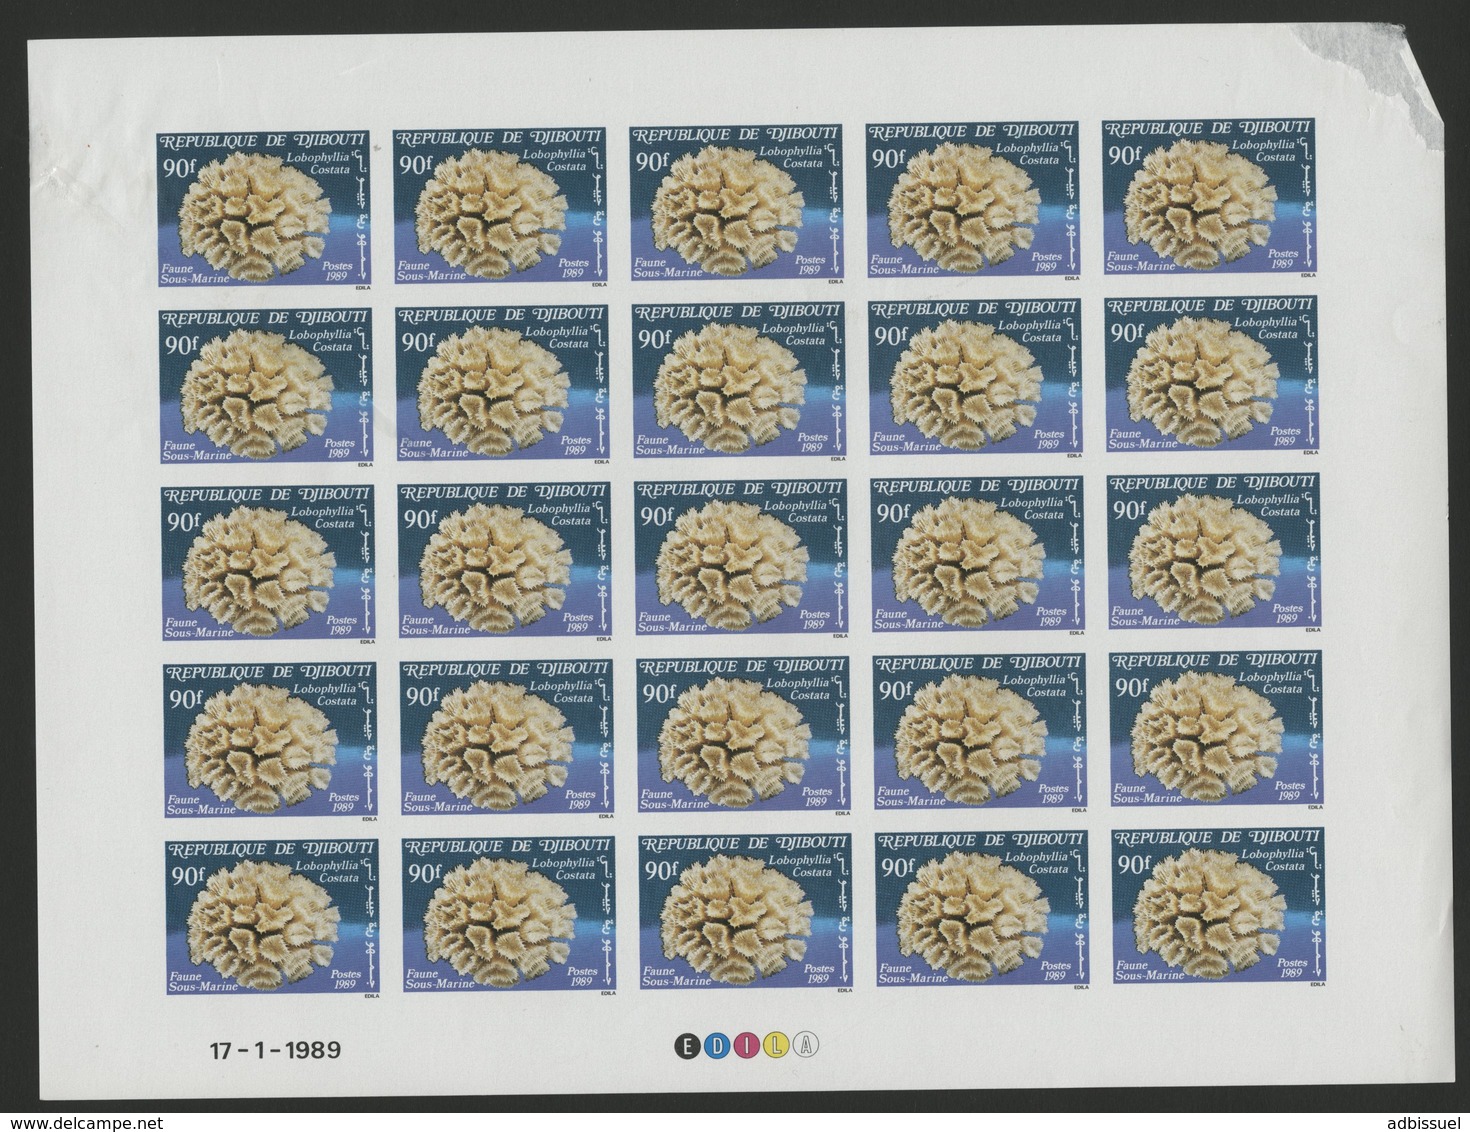 DJIBOUTI N° 647 FEUILLE COMPLETE DE 25 Ex. MNH ** Non Dentelés (imperforated) LABOPHYLLIA COSTATA Lobed Cactus Coral - Marine Life